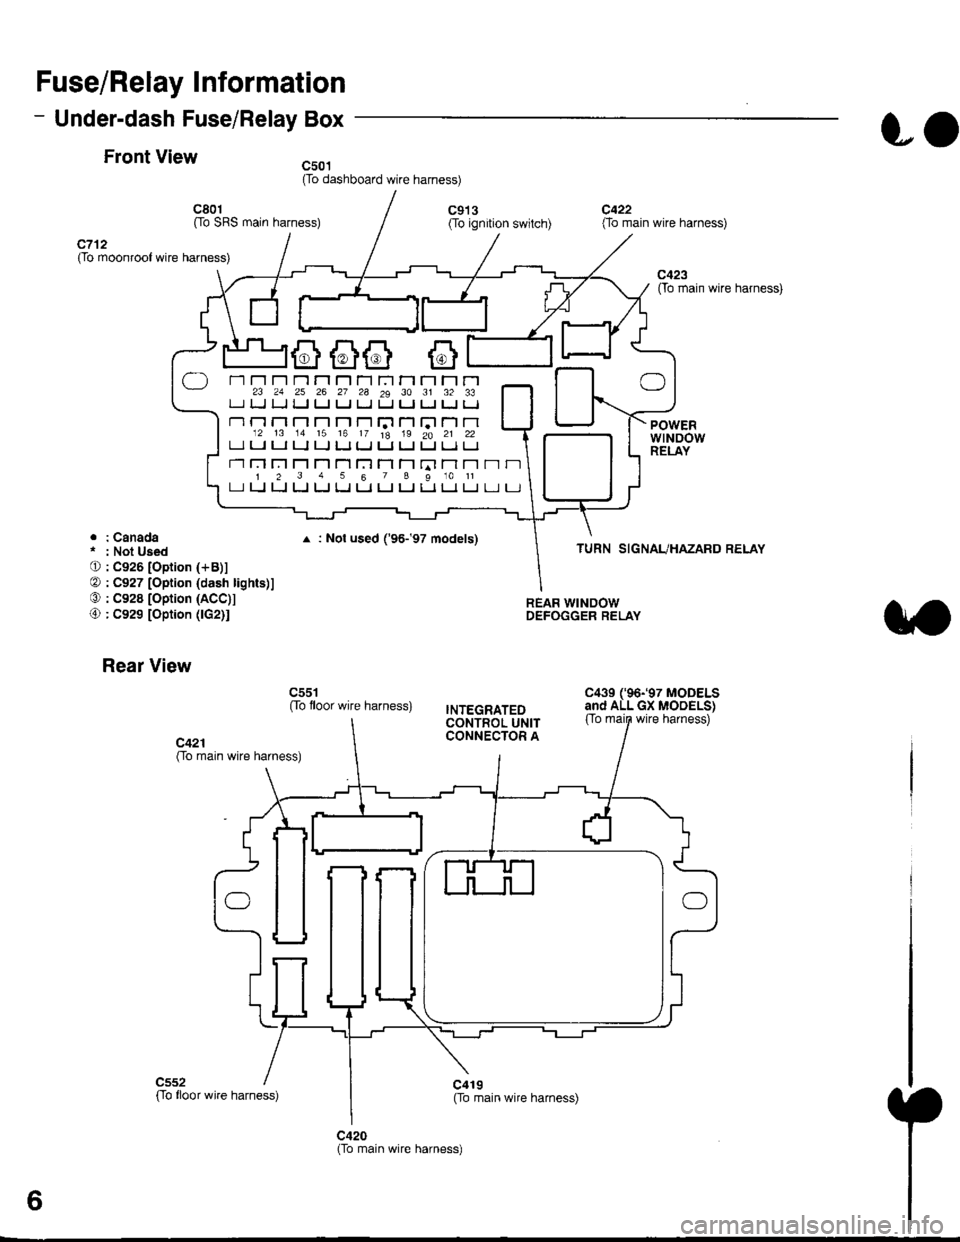 HONDA CIVIC 1996 6.G User Guide Fuse/Relay Information
- Under-dash Fuse/Relay Box
Front View
c712(To moonroof wire harness)
. : Canadai : Not UsedO : C926 loprion (+B)l
@ : C927 loption (dash lights)]
O : C928 [Option (ACC]I
@ : C9